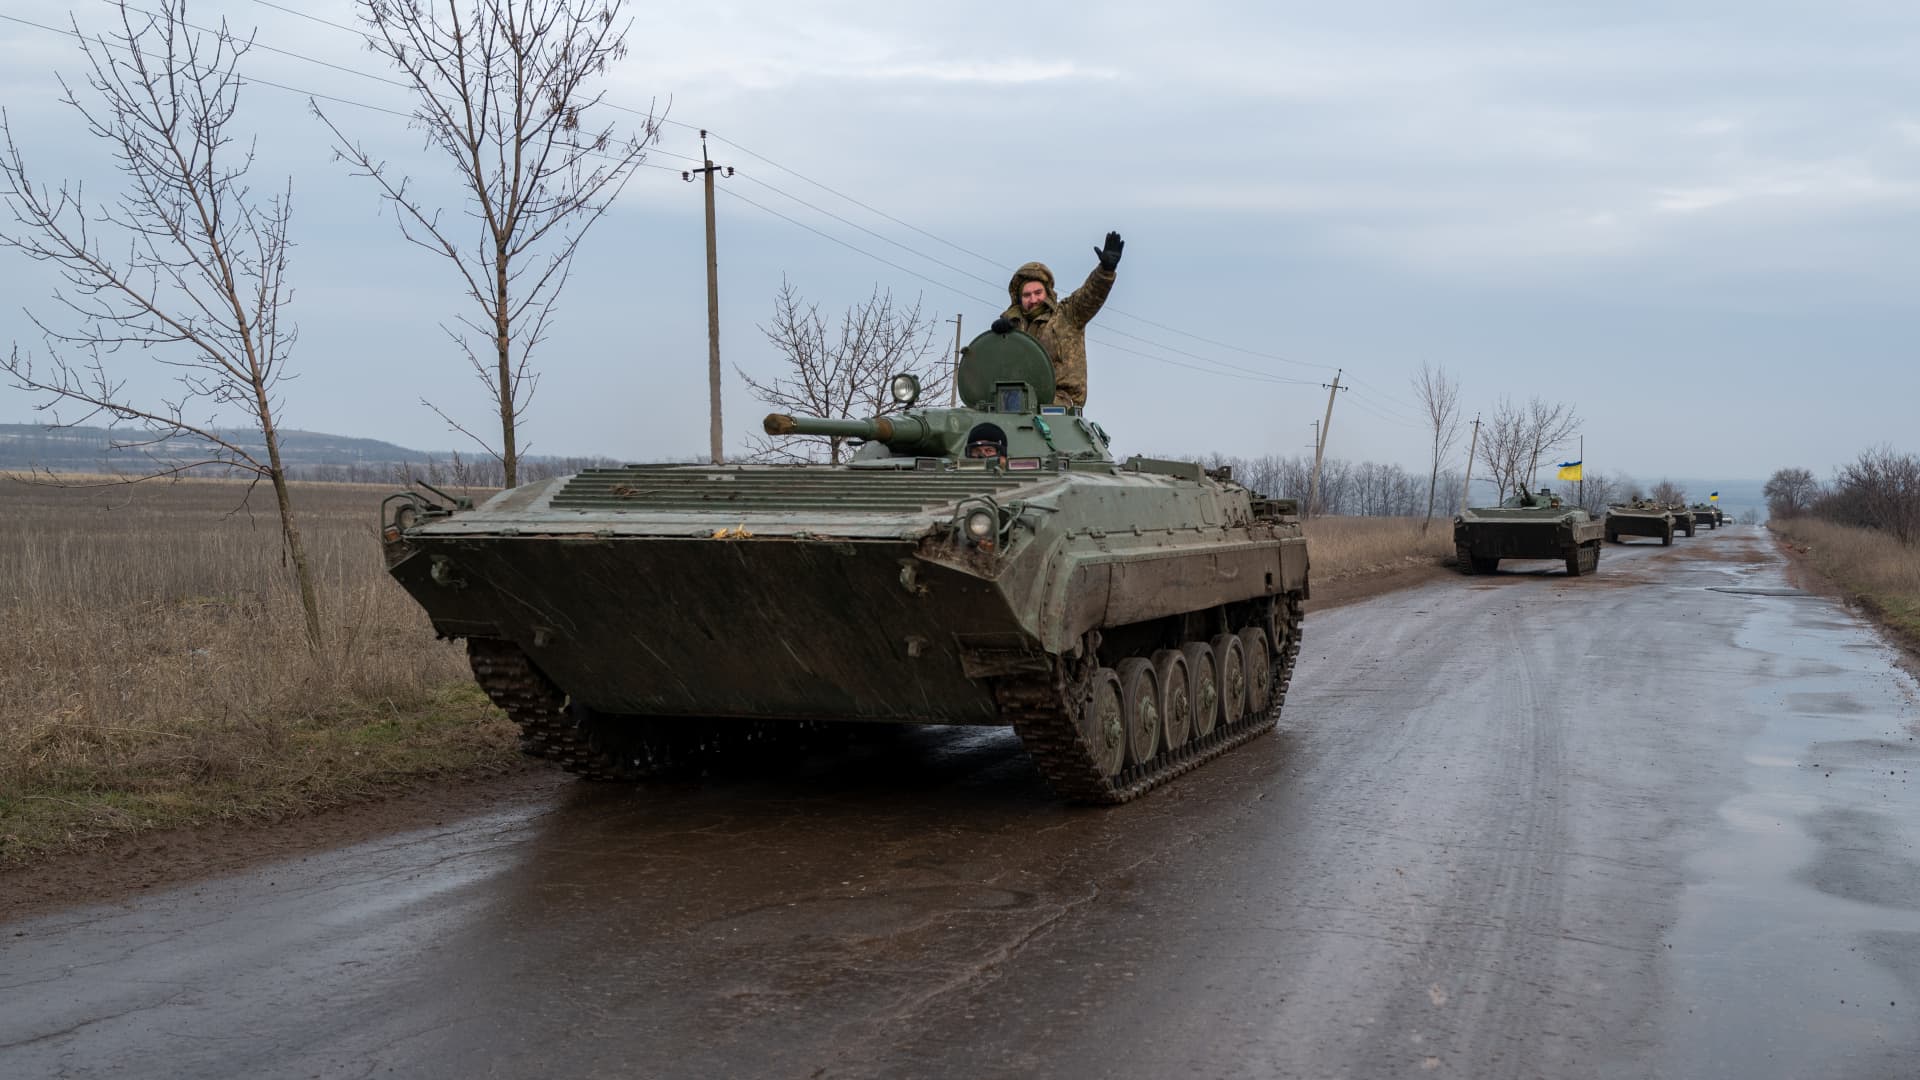 Allies offer more weapons to Ukraine, but no decisions have been made on tanks